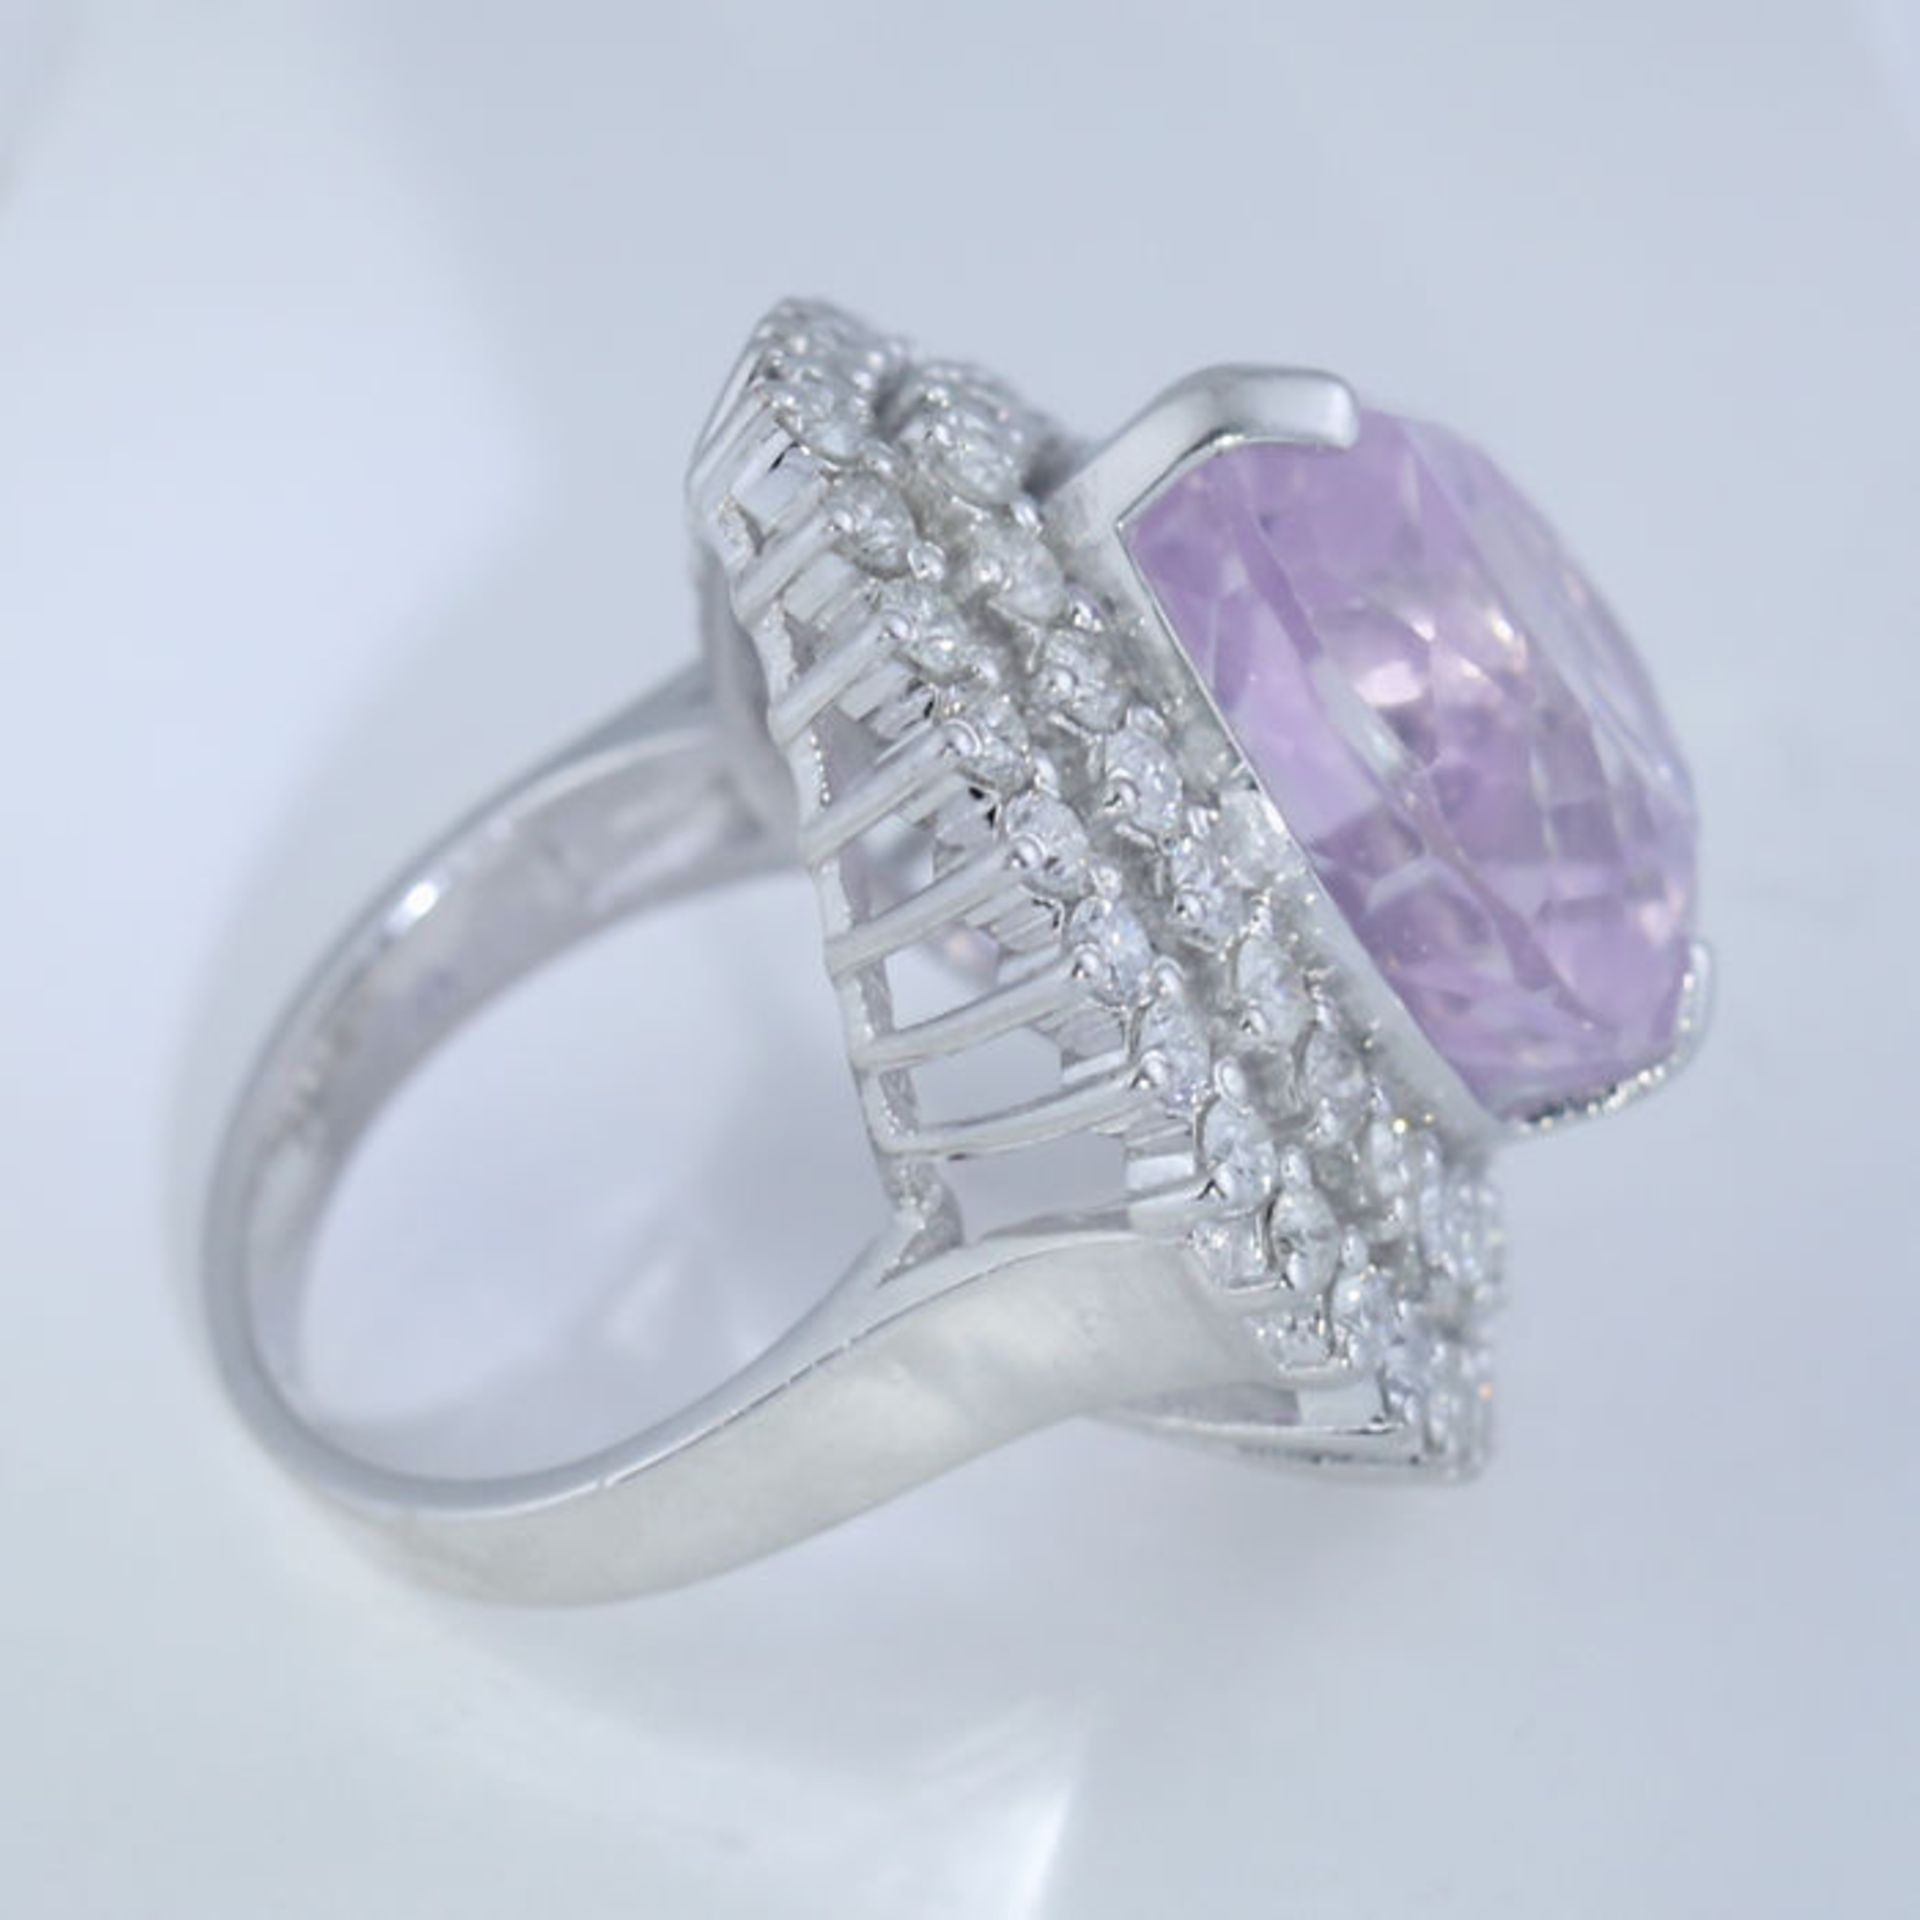 14 K / 585 White Gold Very Unique Large Kunzite (IGI Certified) and Diamond Cocktail Ring - Image 6 of 6